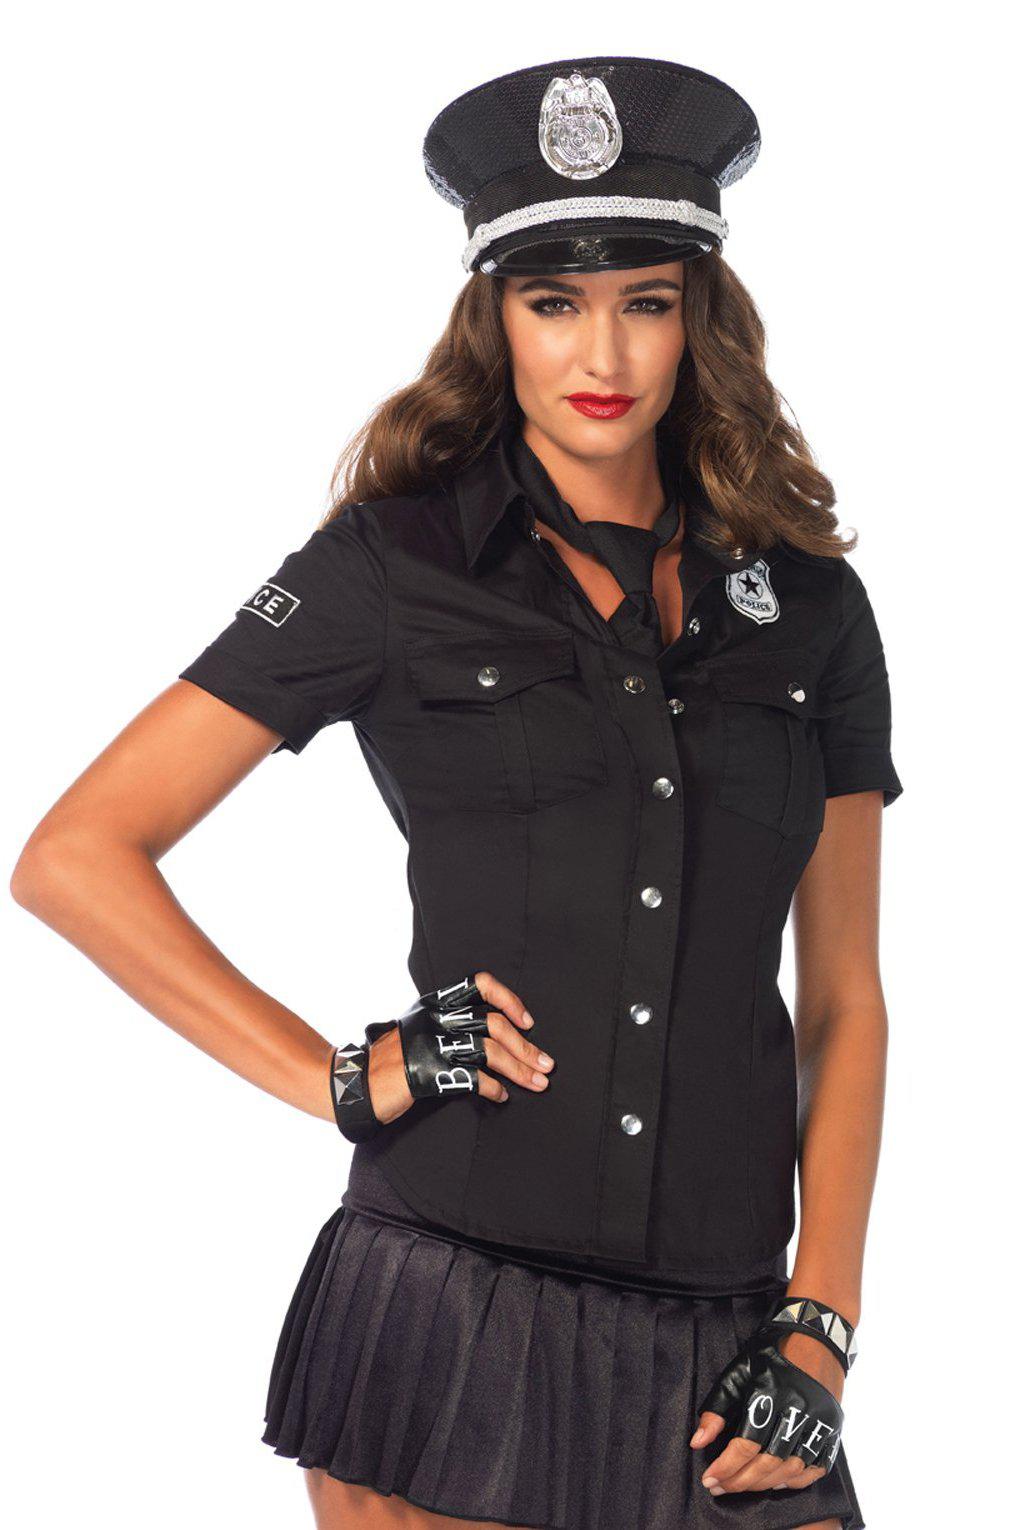 Police Shirt with Badge-Cop Costumes-Leg Avenue-SEXYSHOES.COM